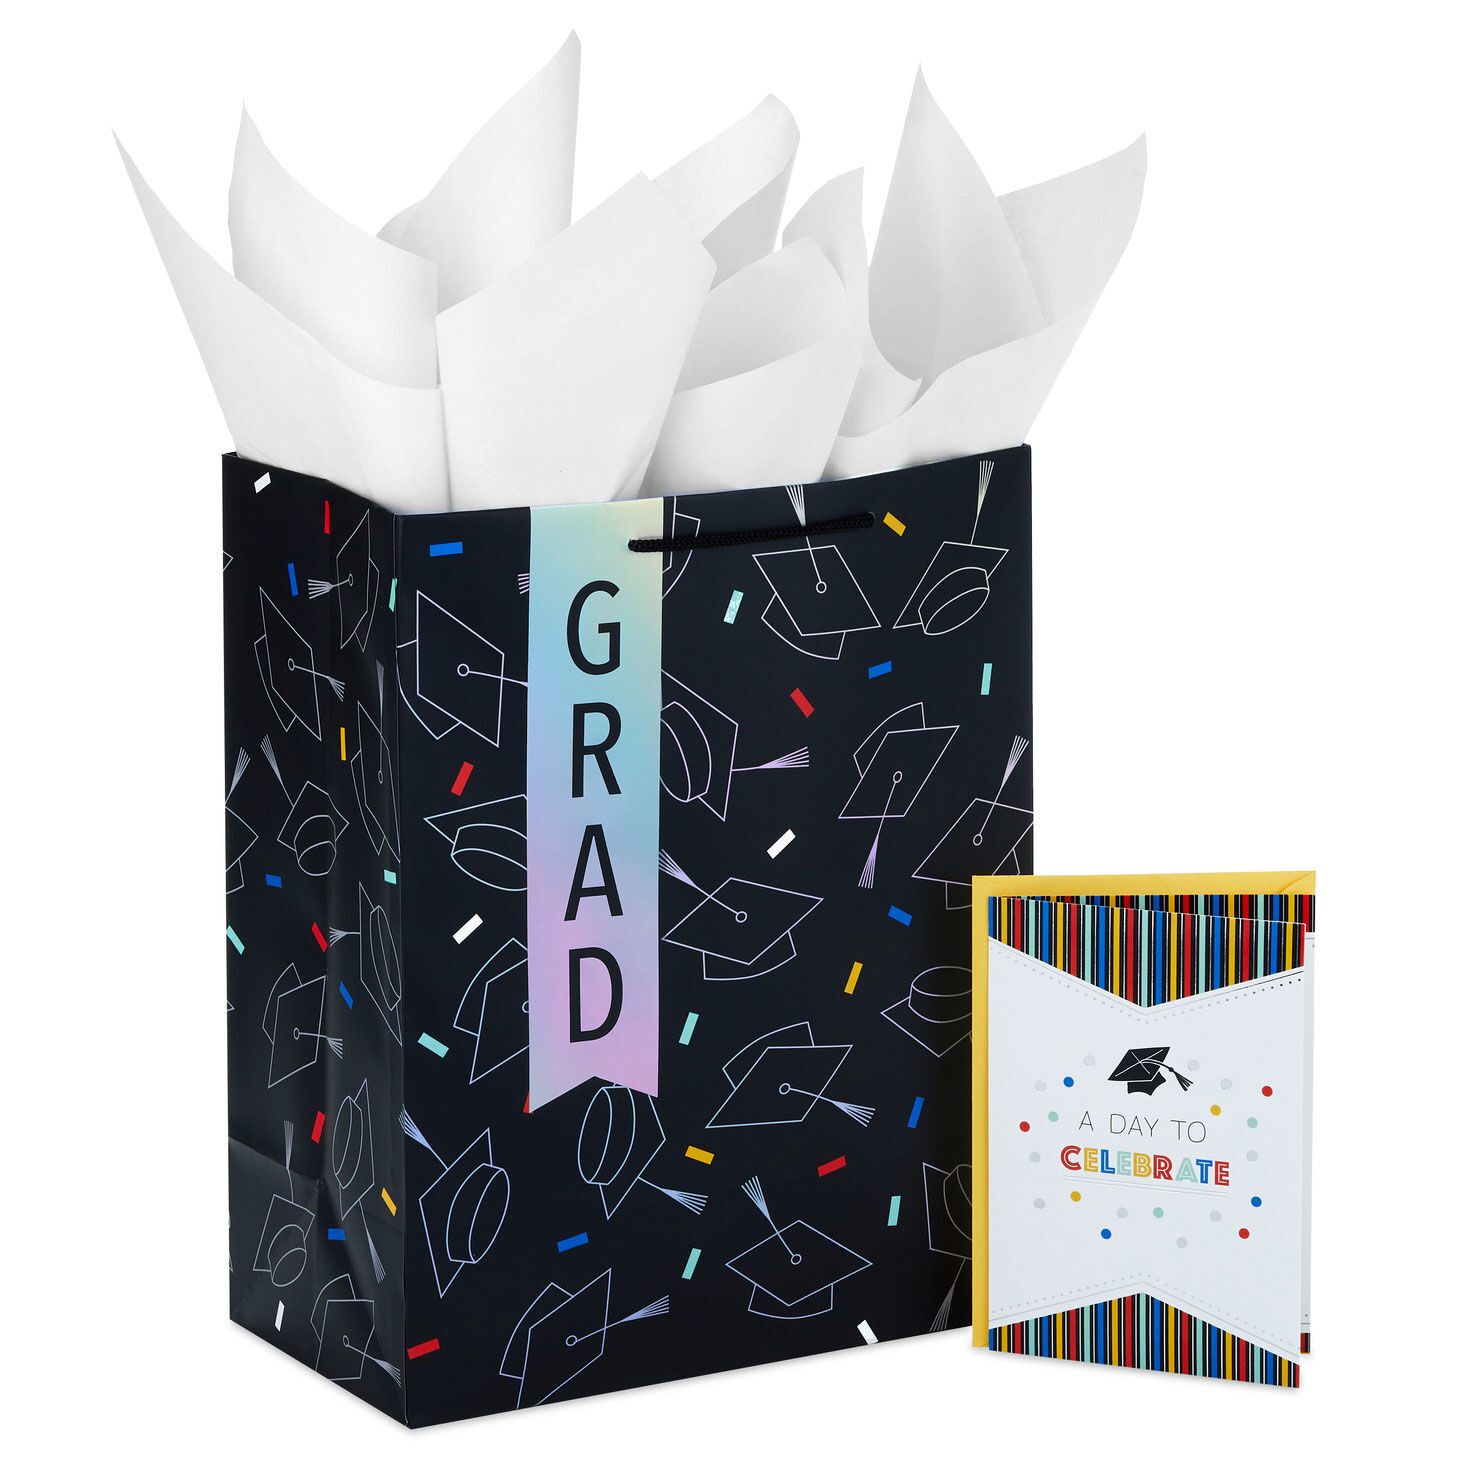  Hallmark Gray Gift Bags in Assorted Sizes (8 Bags: 2 Small 5,  2 Medium 8, 2 Large 11, 2 Extra Large 14) for Christmas, Weddings,  Birthdays, Graduations, Father's Day : Health & Household